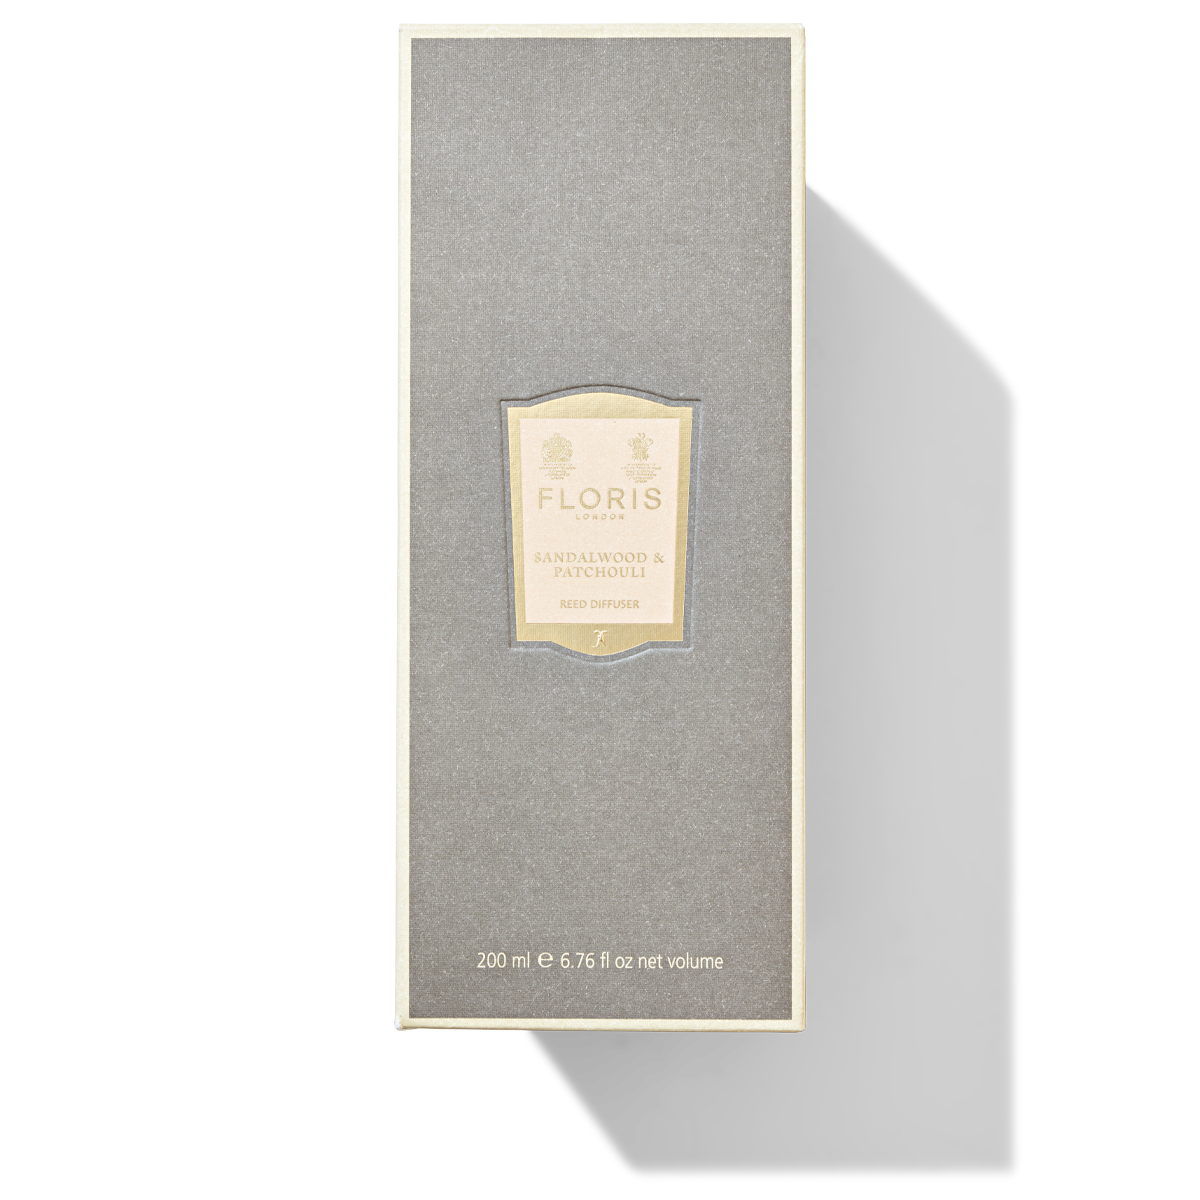 A grey mushroom coloured packaging box for the sandalwood and patchouli reed diffuser.